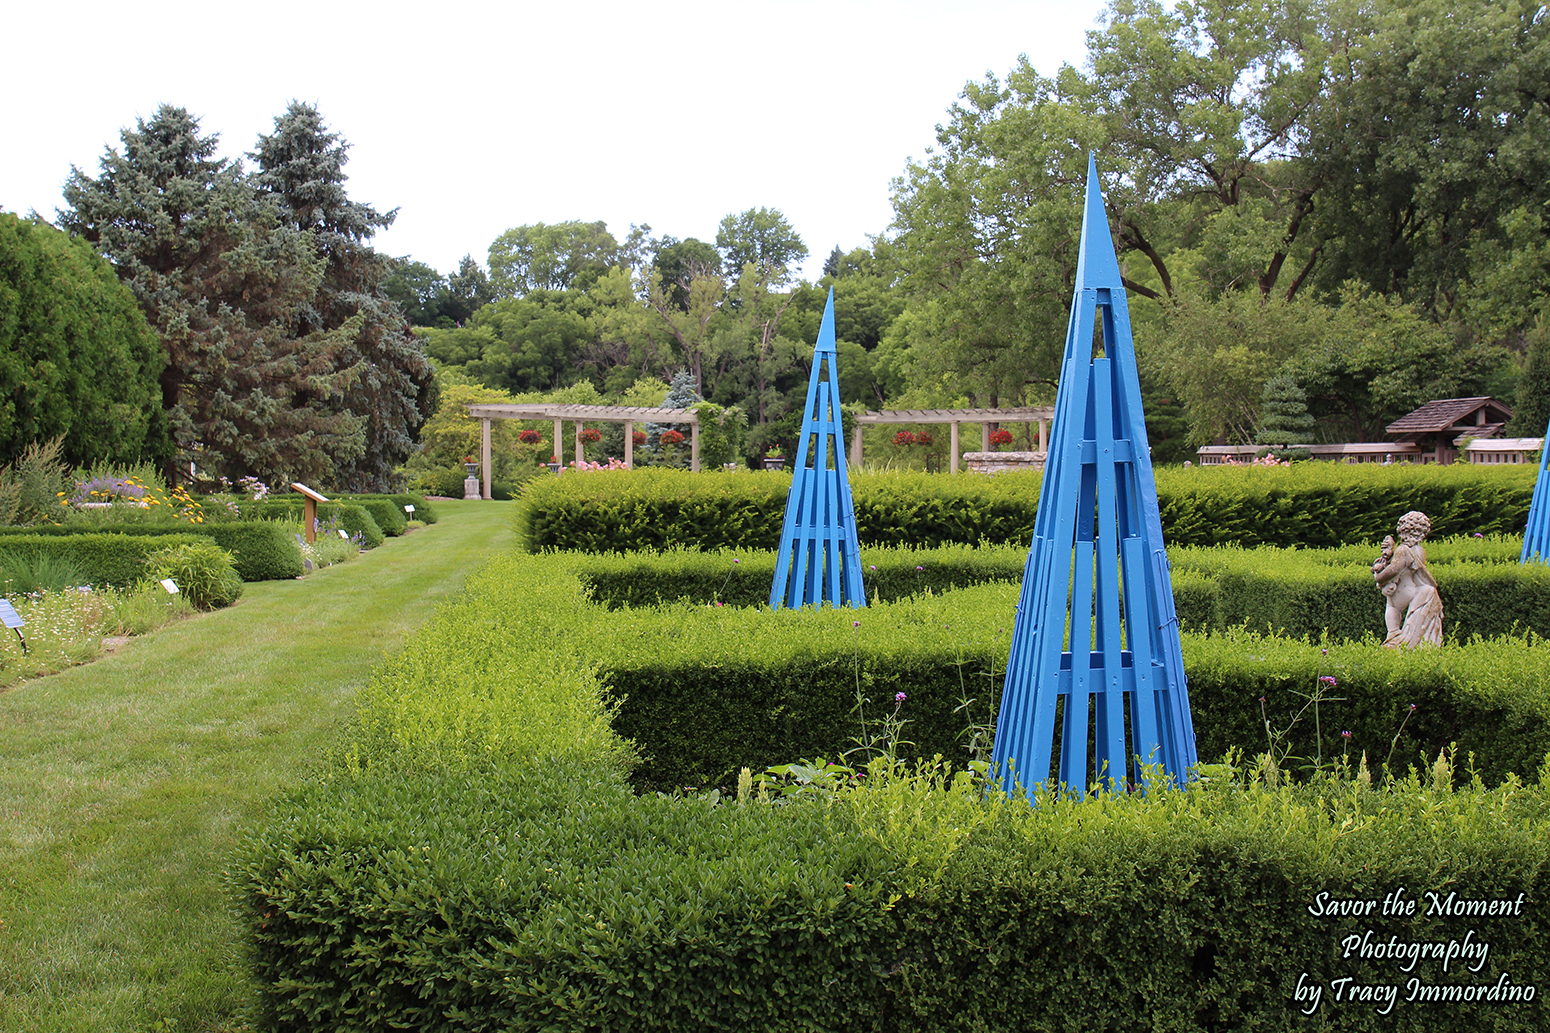 Visiting the Rotary Botanical Gardens in Janesville, Wisconsin Savor